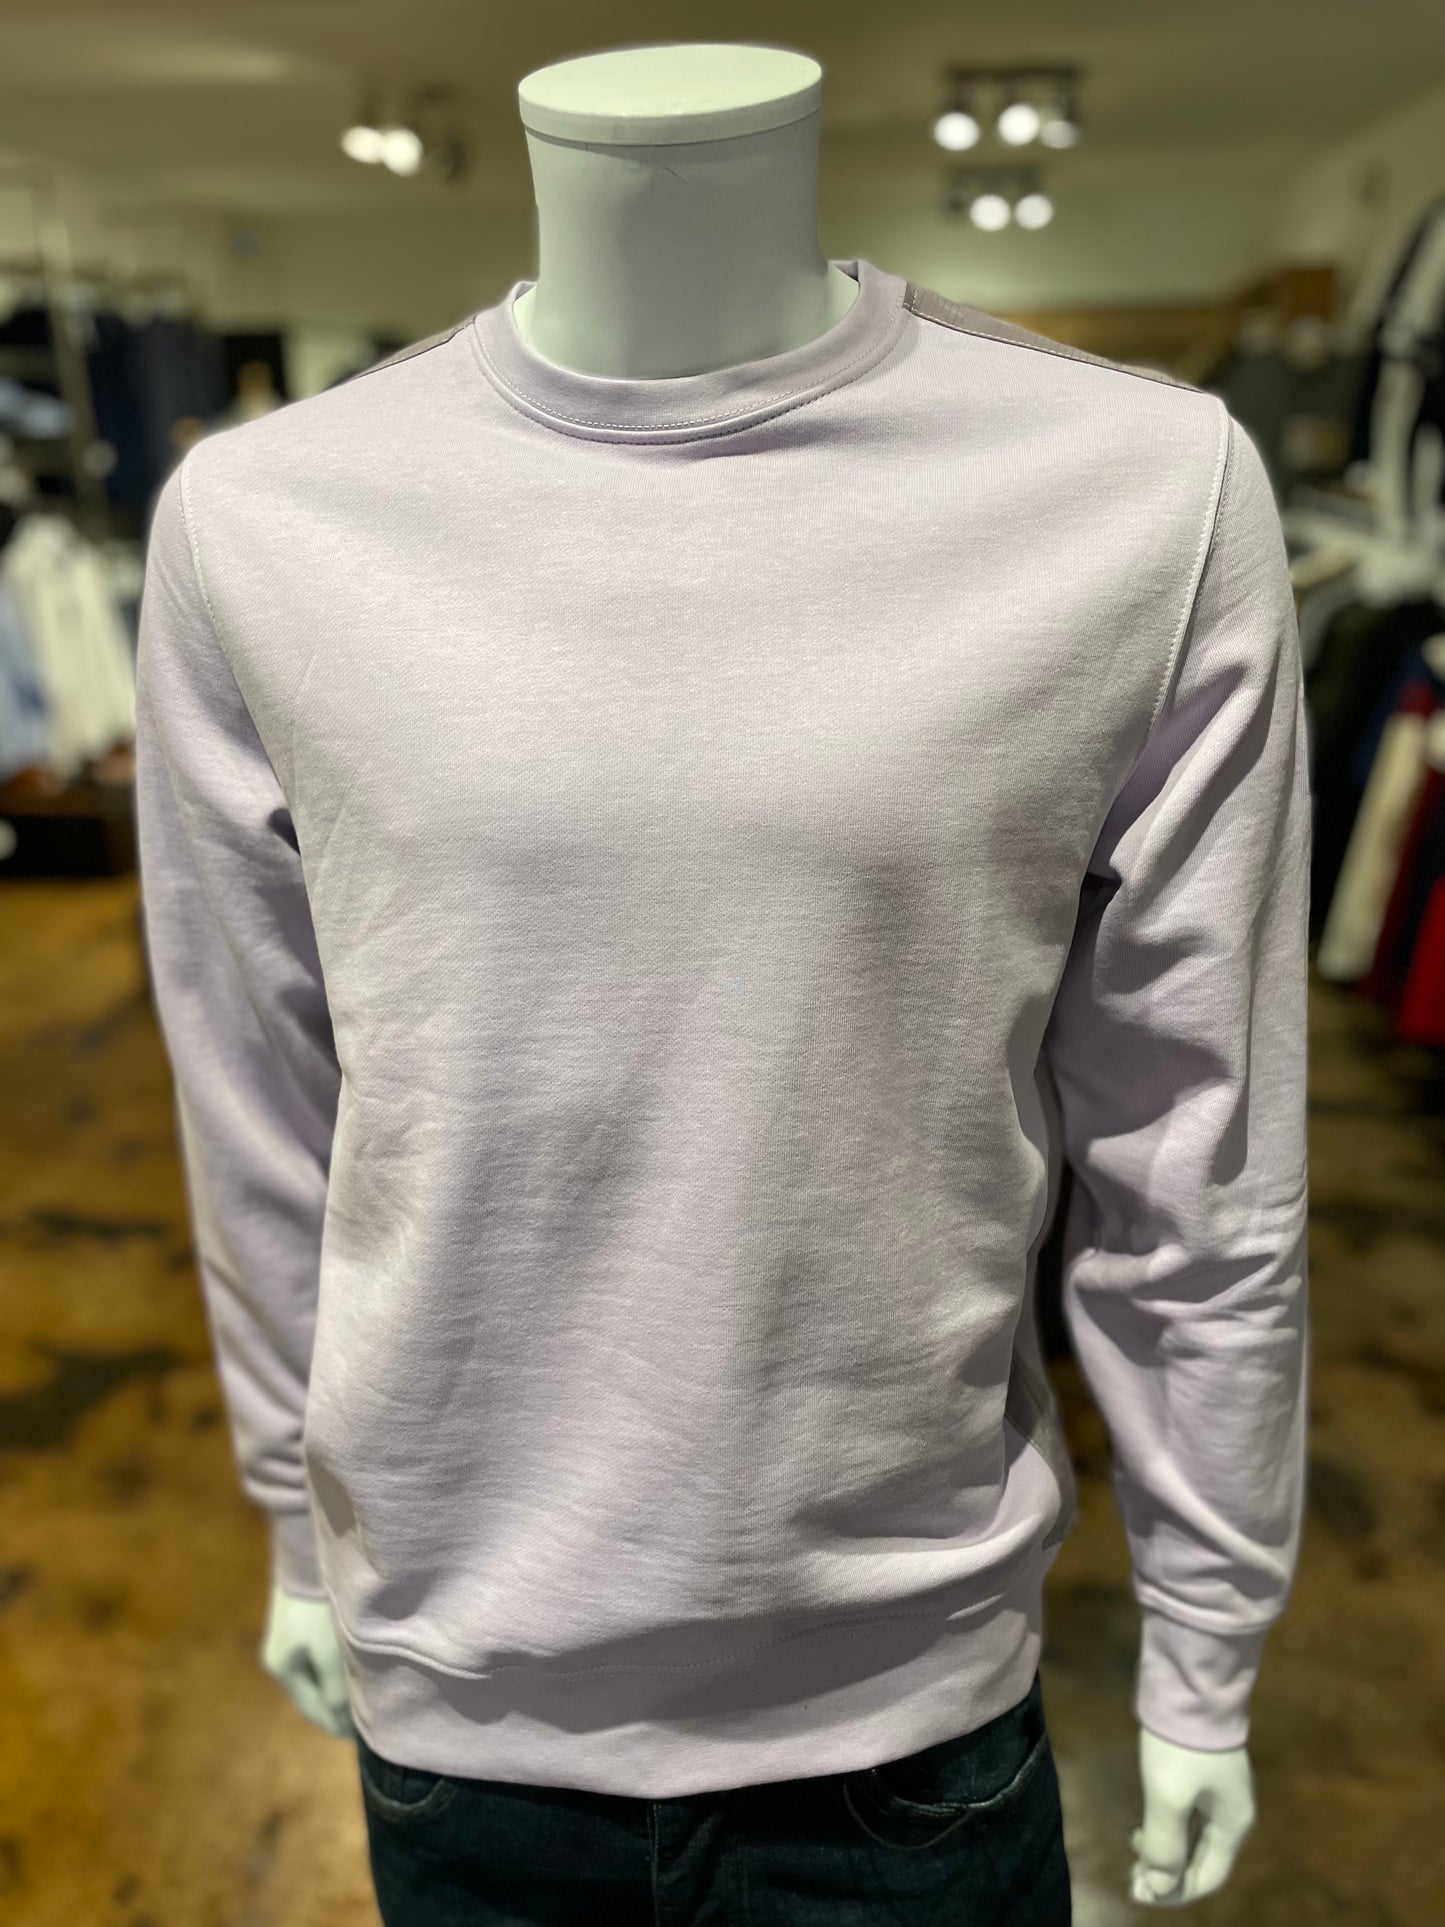 Weekend Offender F Bomb Sweat - Wisteria Lilac